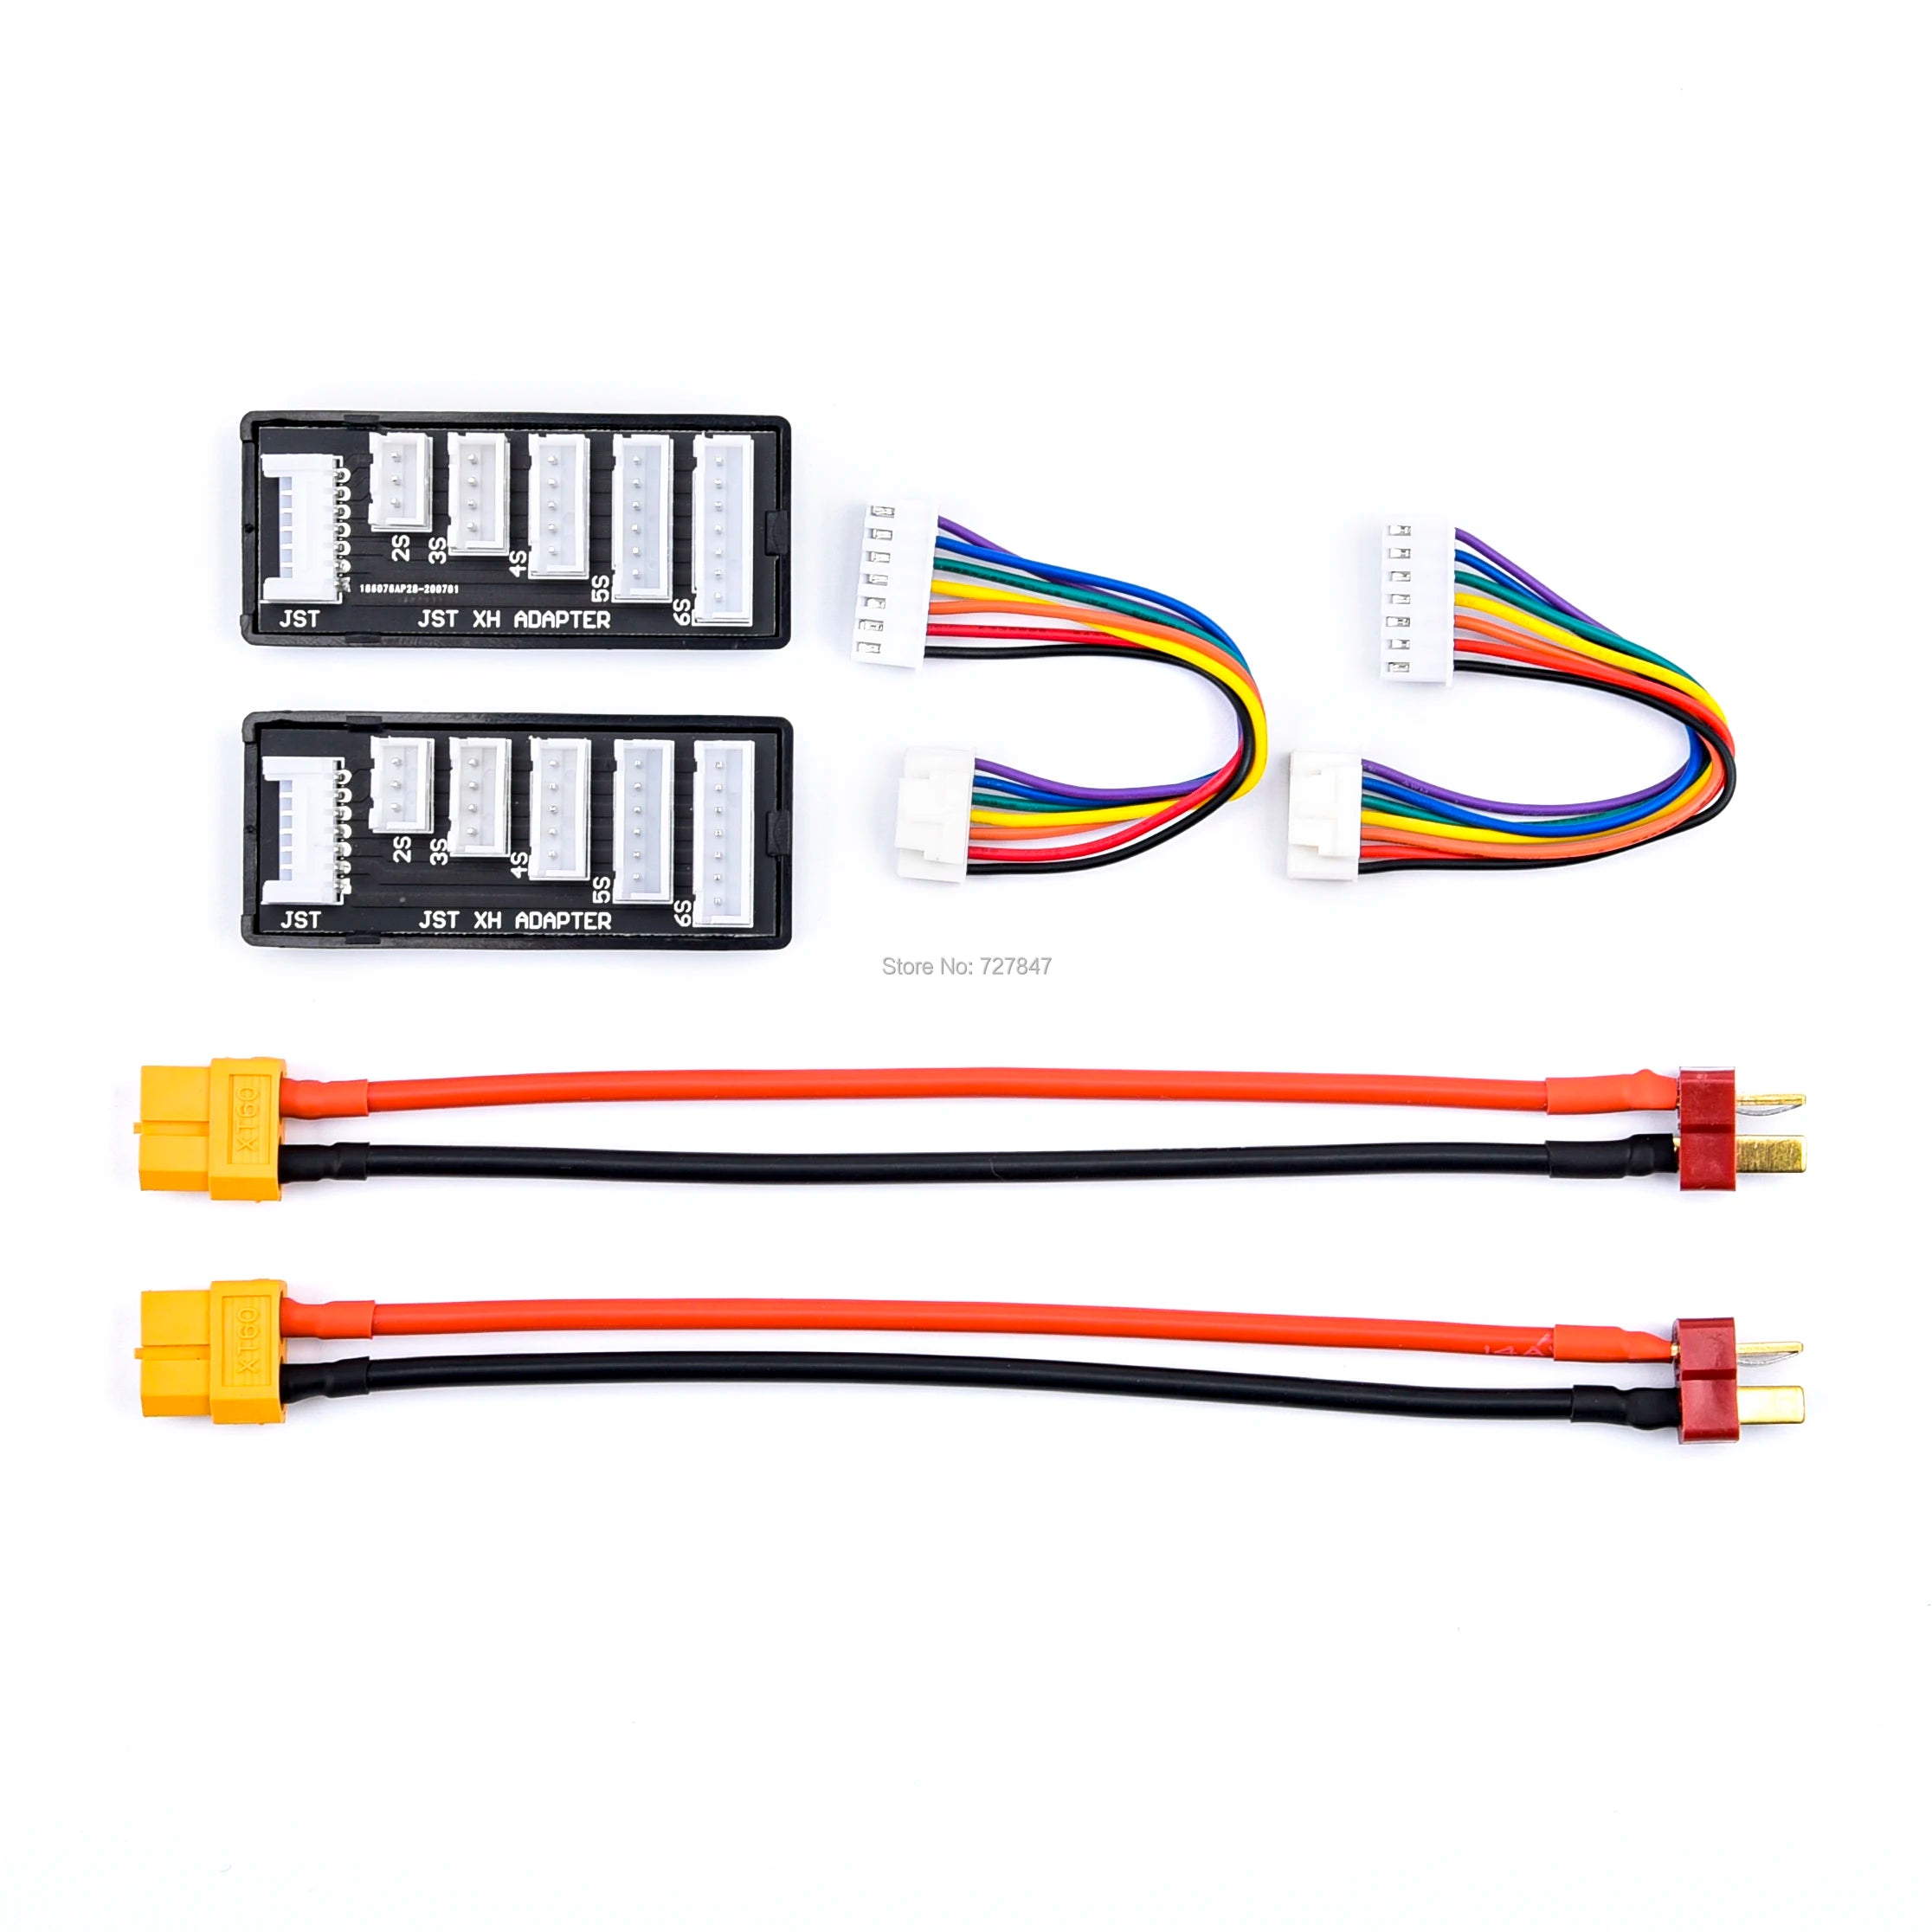 Extension Board x2 or XT30 or xT60 Extension Cable x